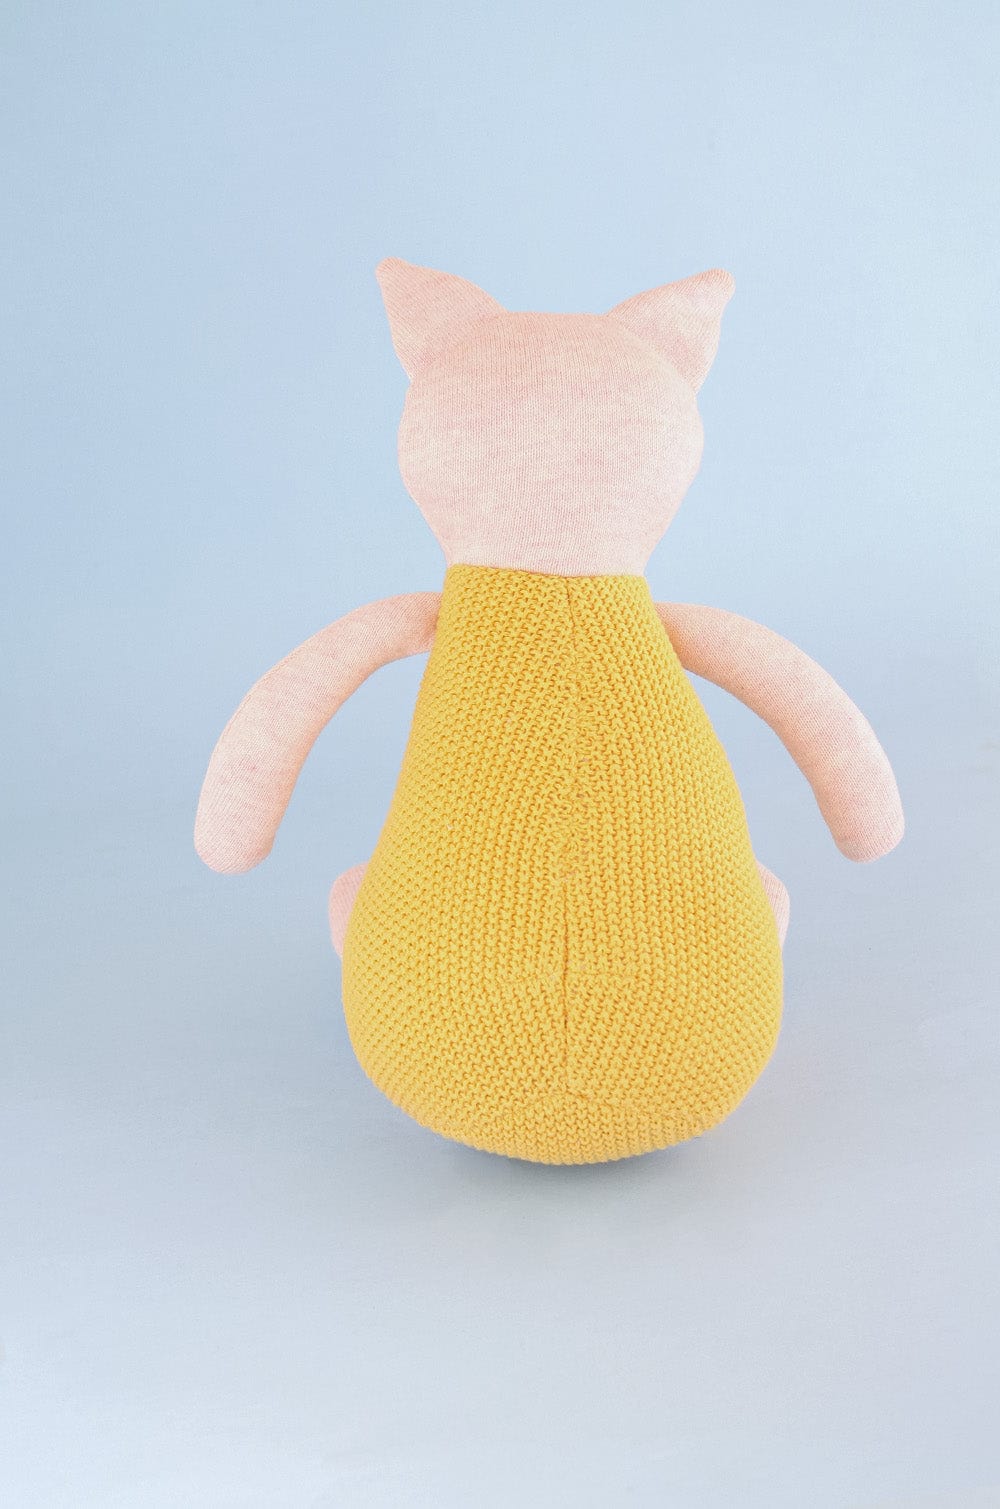 Miss Piglet Cuddly Knitted Cotton Toy